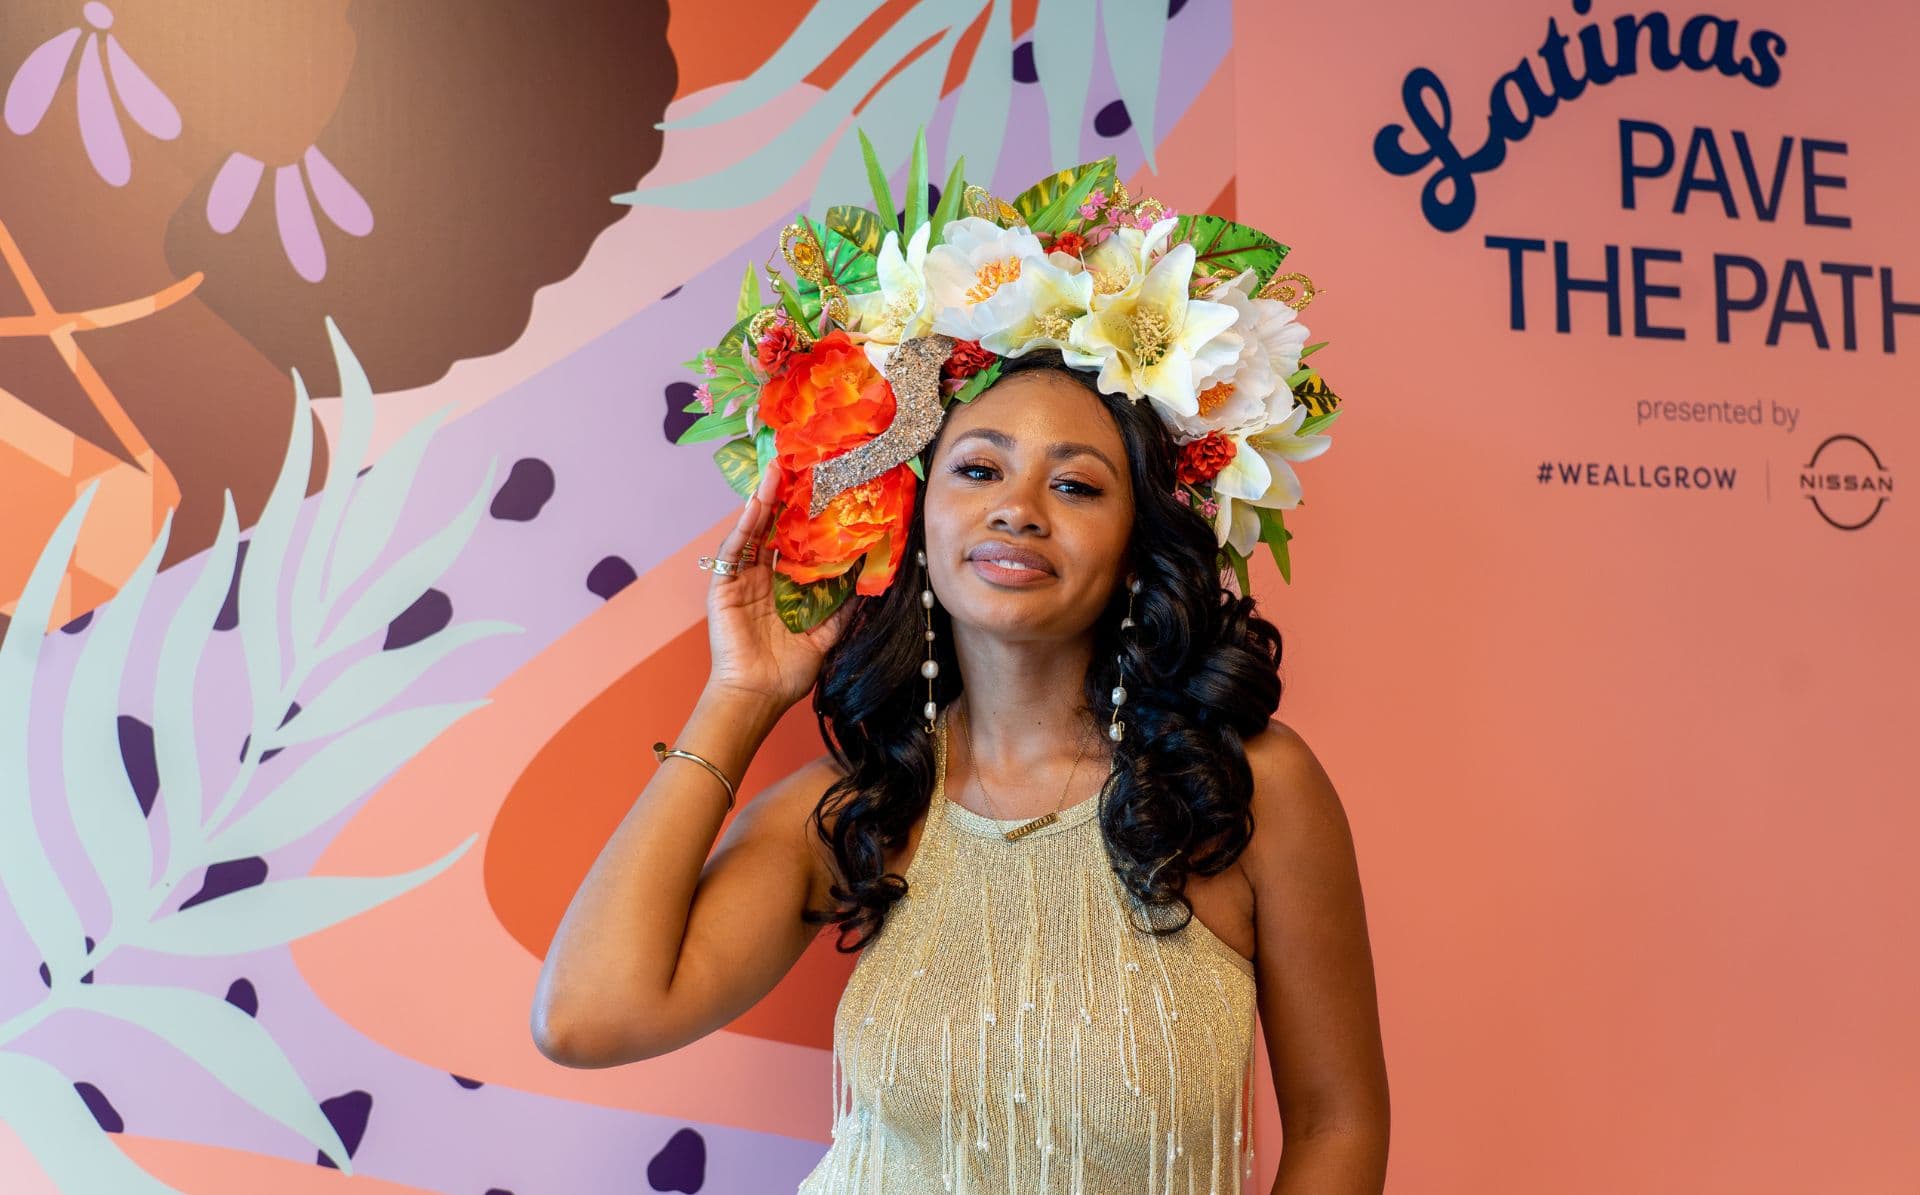 Visual artist and writer Reyna Noriega is shown with a crown of flowers at the Latinas Pave the Path event, a #WeAllGrow event in partnership with Nissan